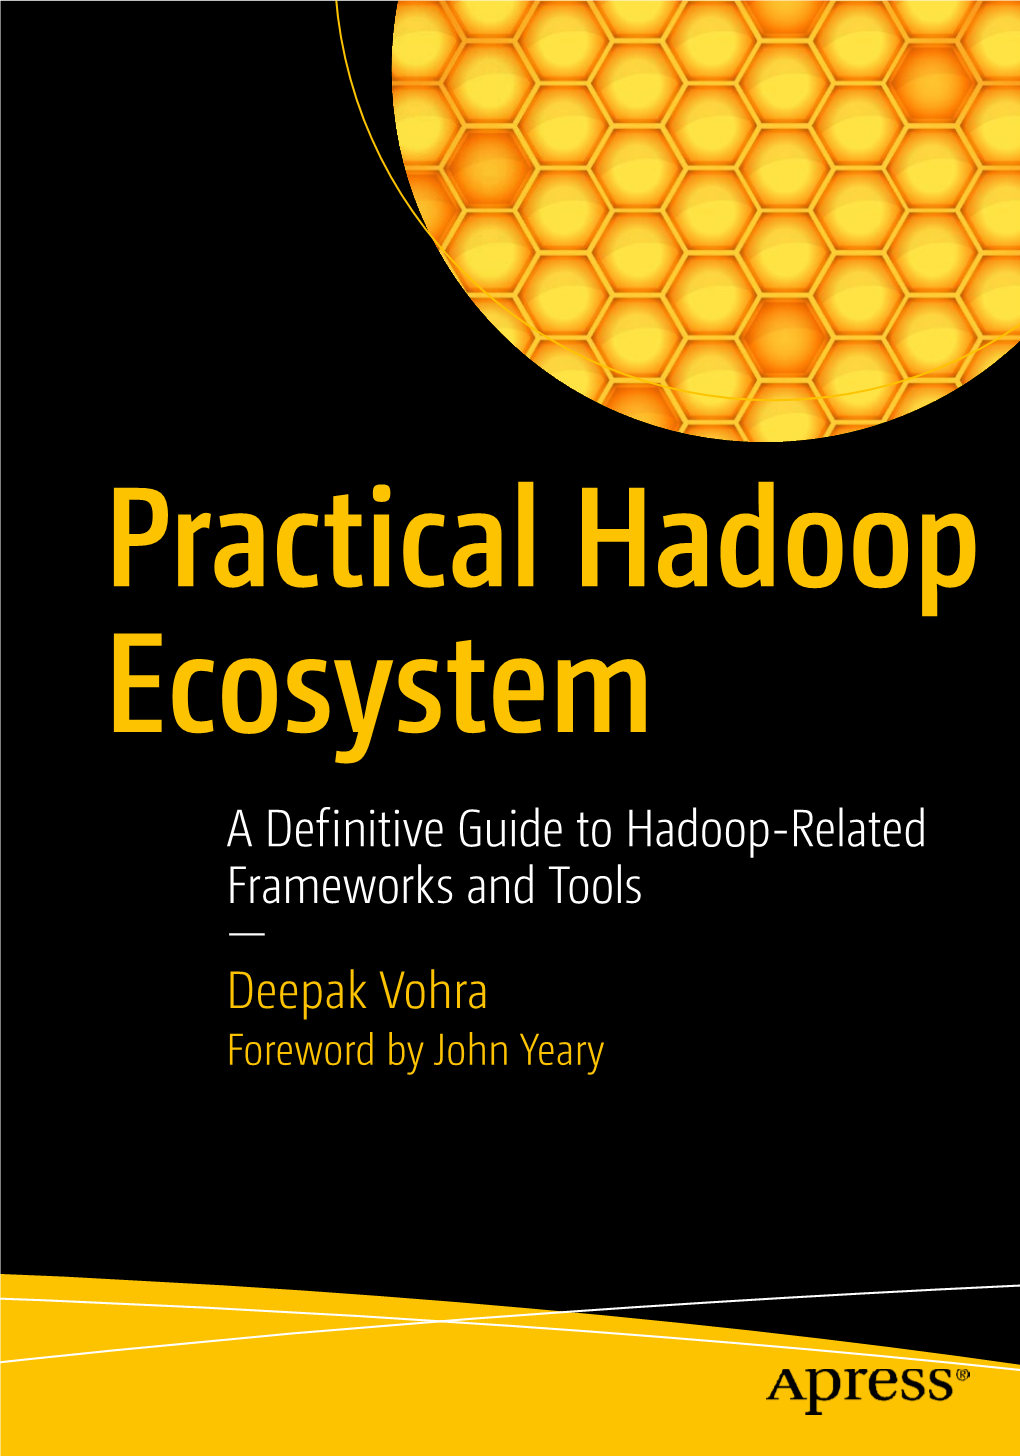 A Definitive Guide to Hadoop-Related Frameworks and Tools Deepak Vohra